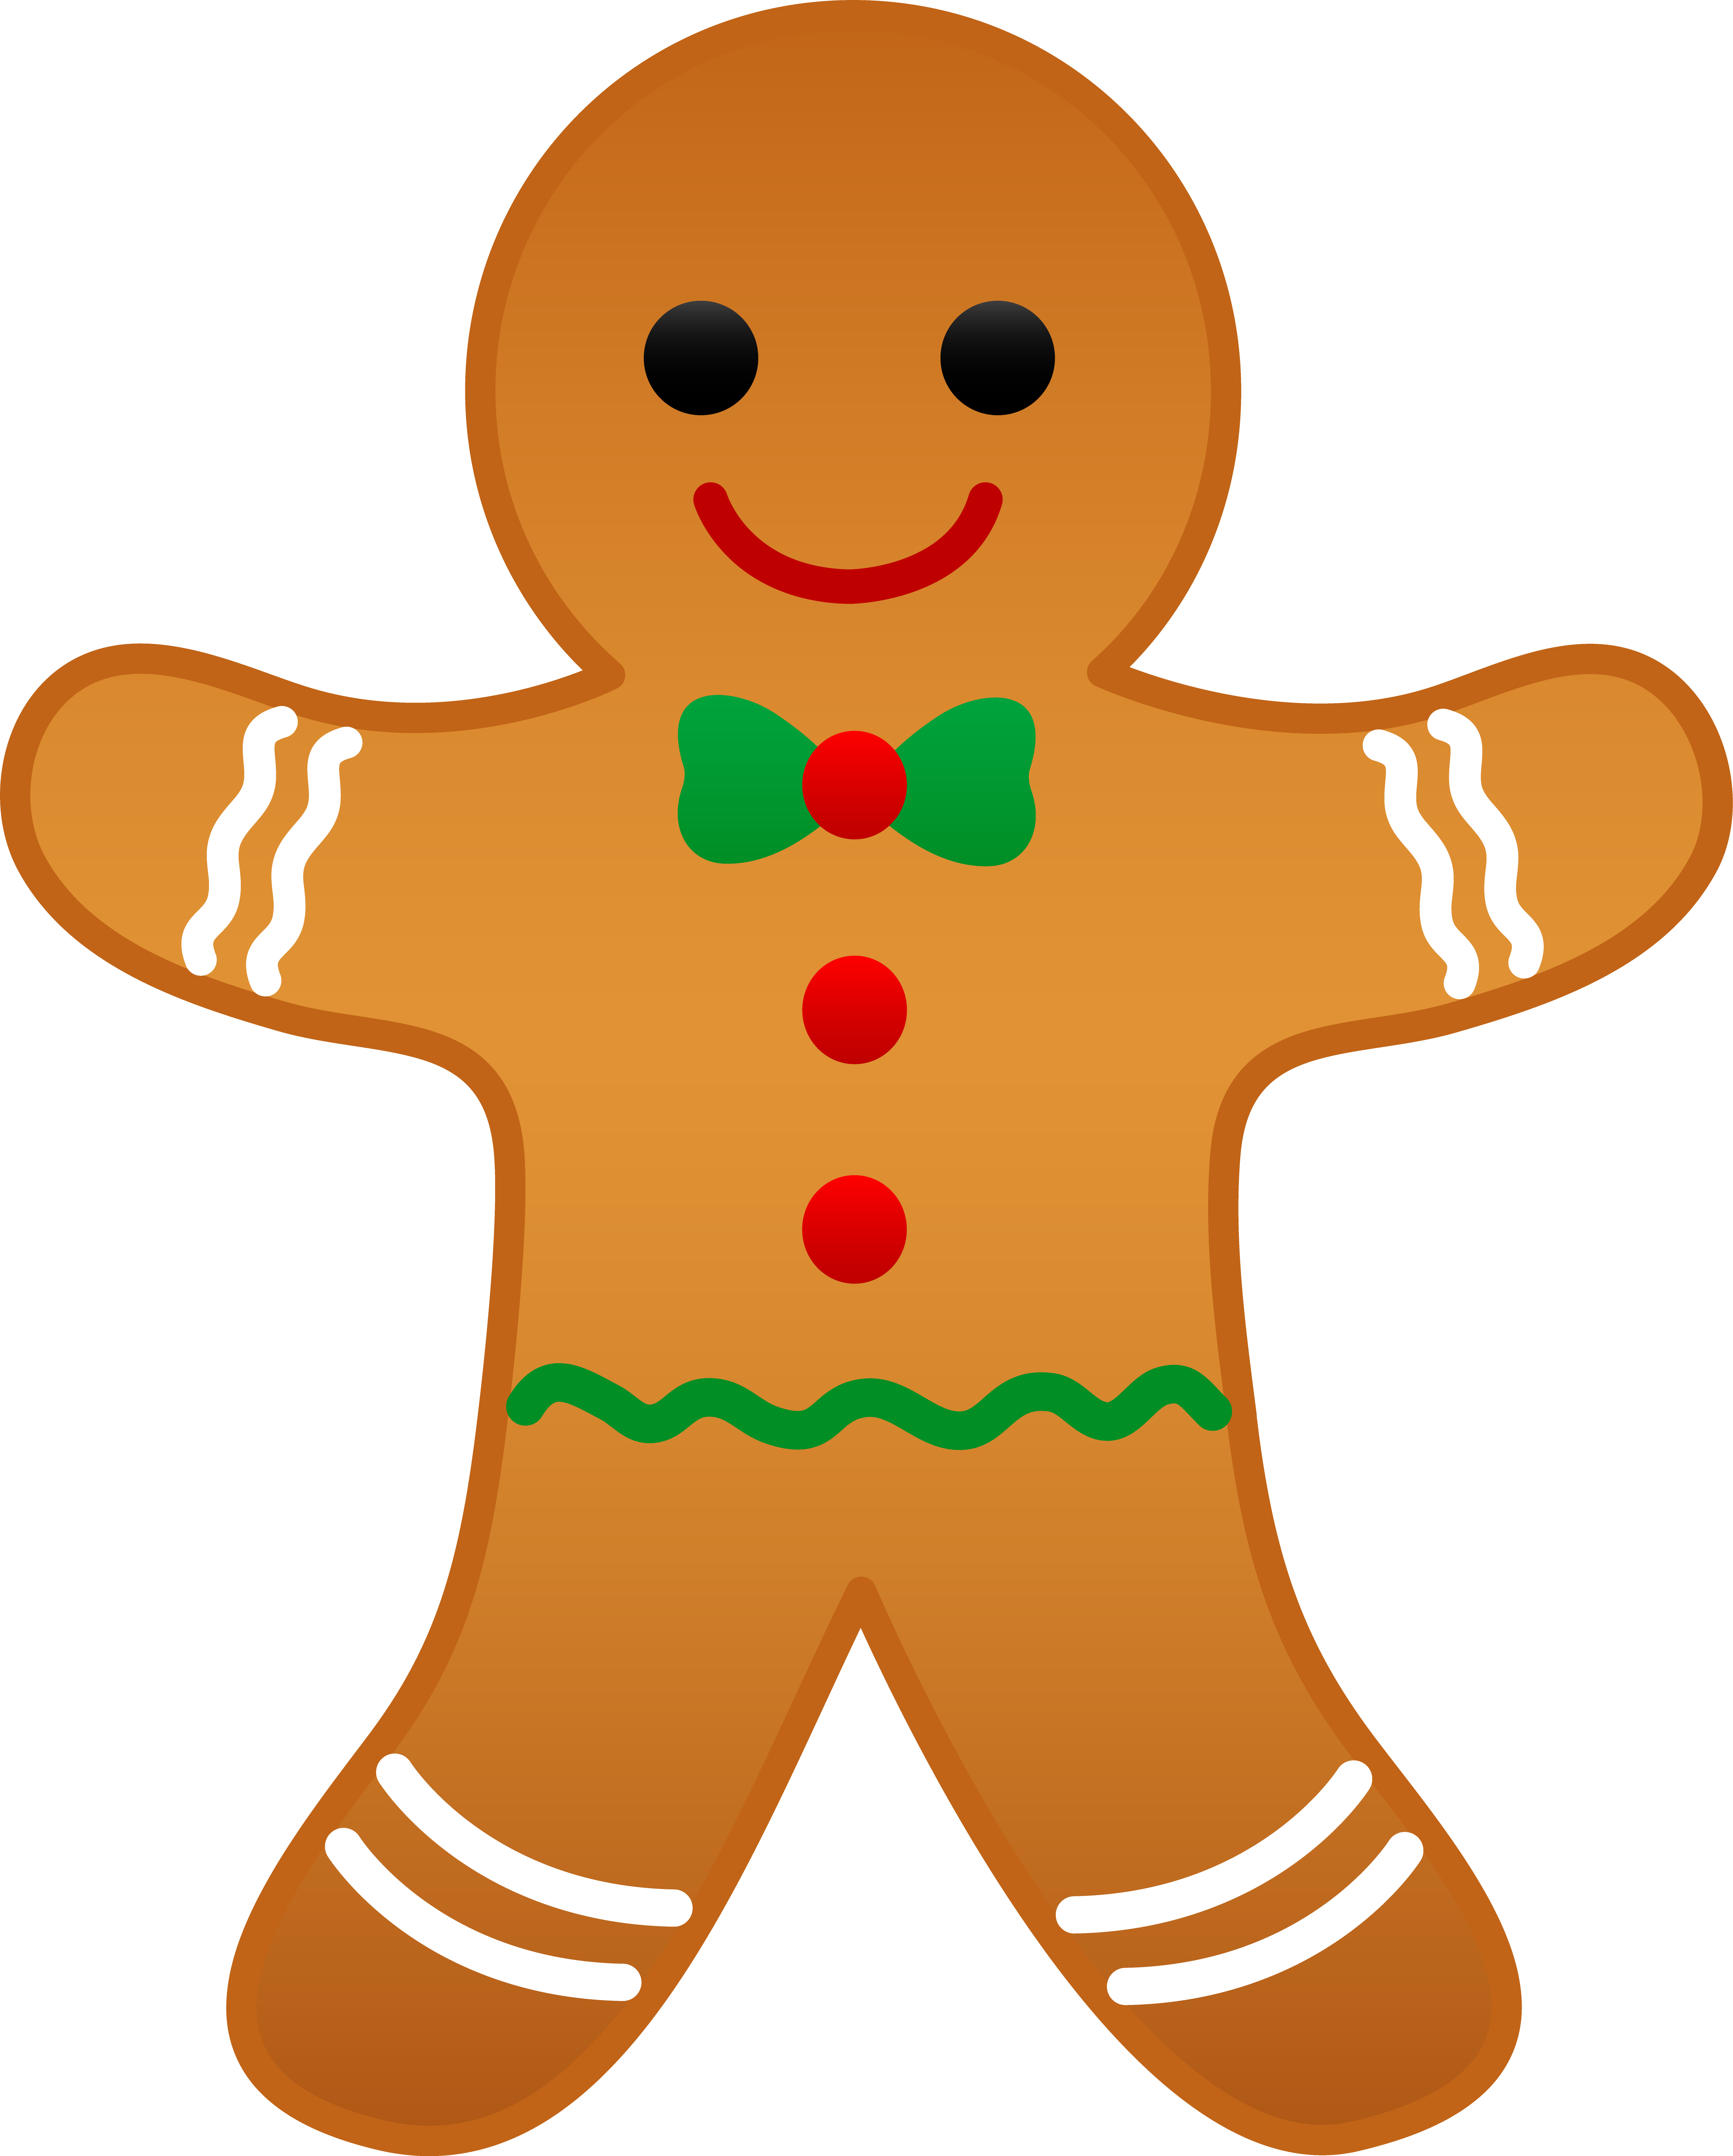 Christmas Gingerbread Man Clip Art 18 How To Decorate The ...